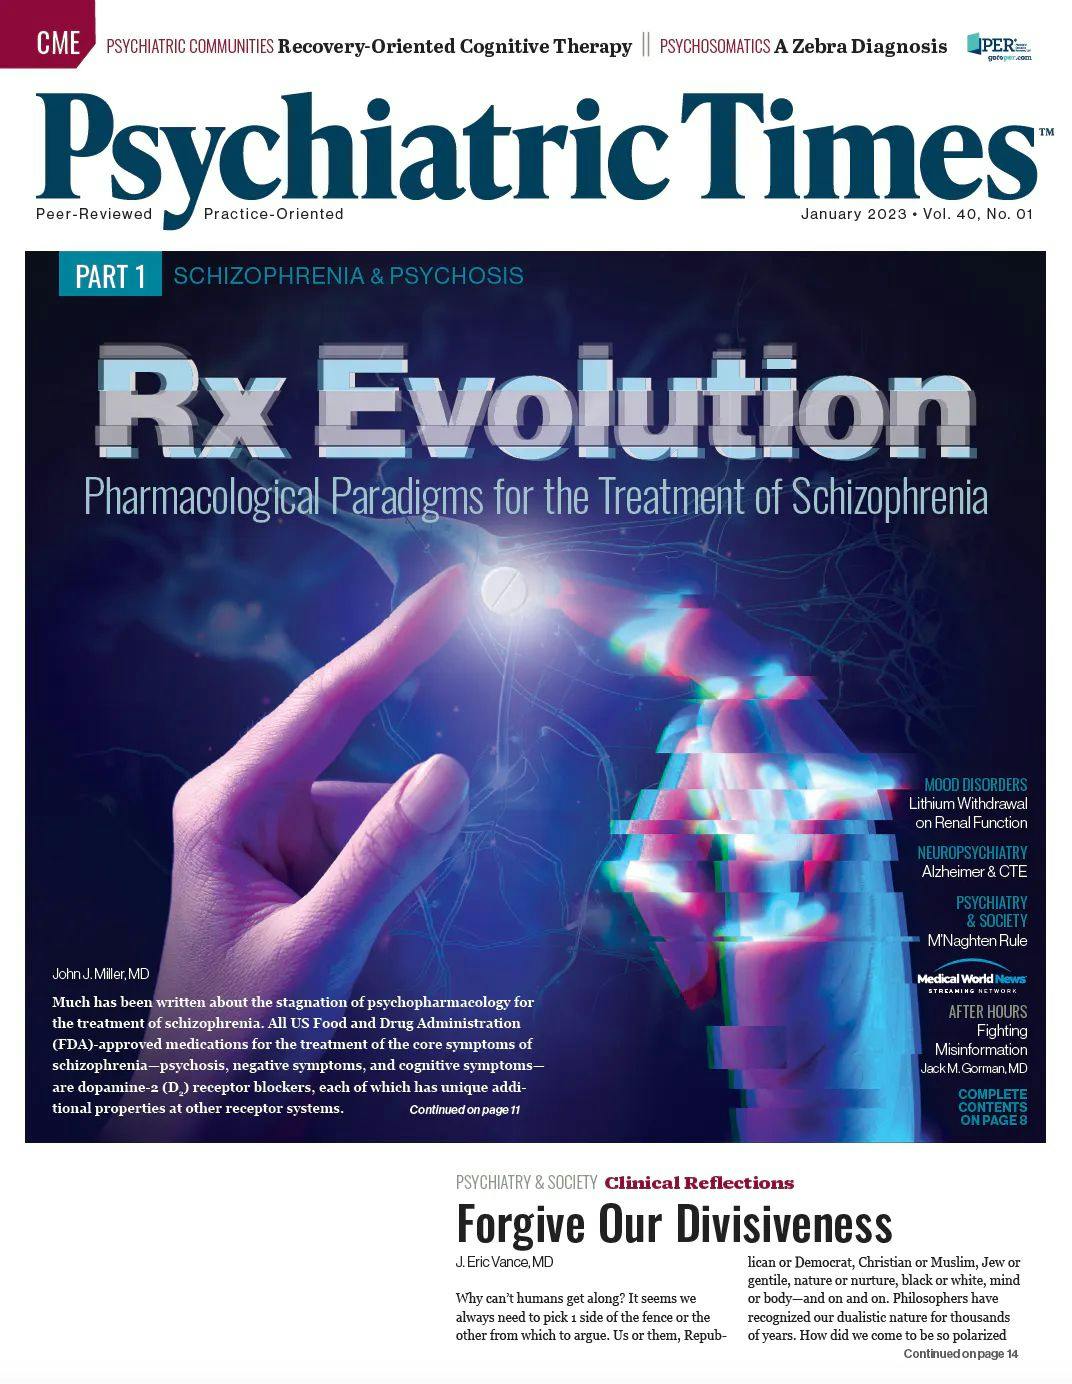 The experts weighed in on a wide variety of psychiatric issues for the January 2023 issue of Psychiatric Times.